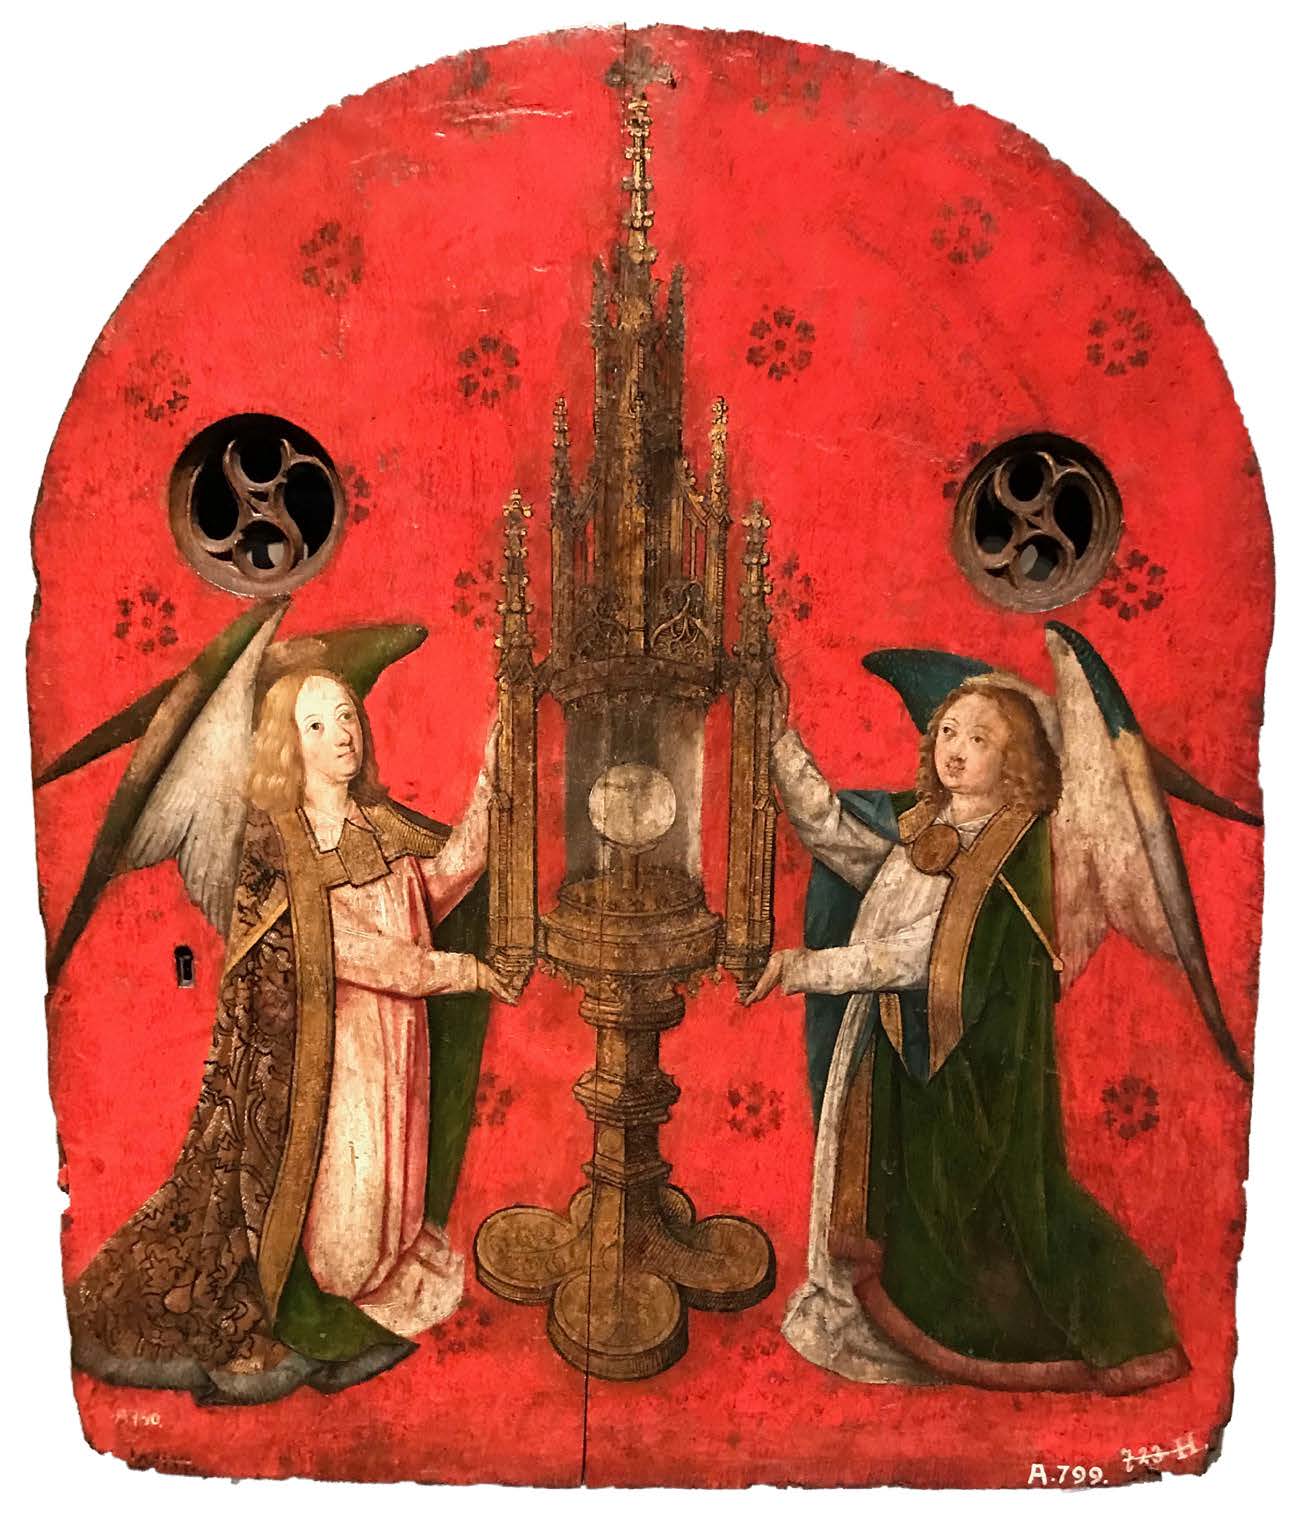 Later in the Middle Ages emphasis was shifted to encountering the presence of Christ through passion relics or the consecrated host (sacrament bread), which was often displayed for viewing in a transparent receptacle known as a monstrance. Sacrament cupboard door, fifteenth century. Museum Schnütgen, Köln.